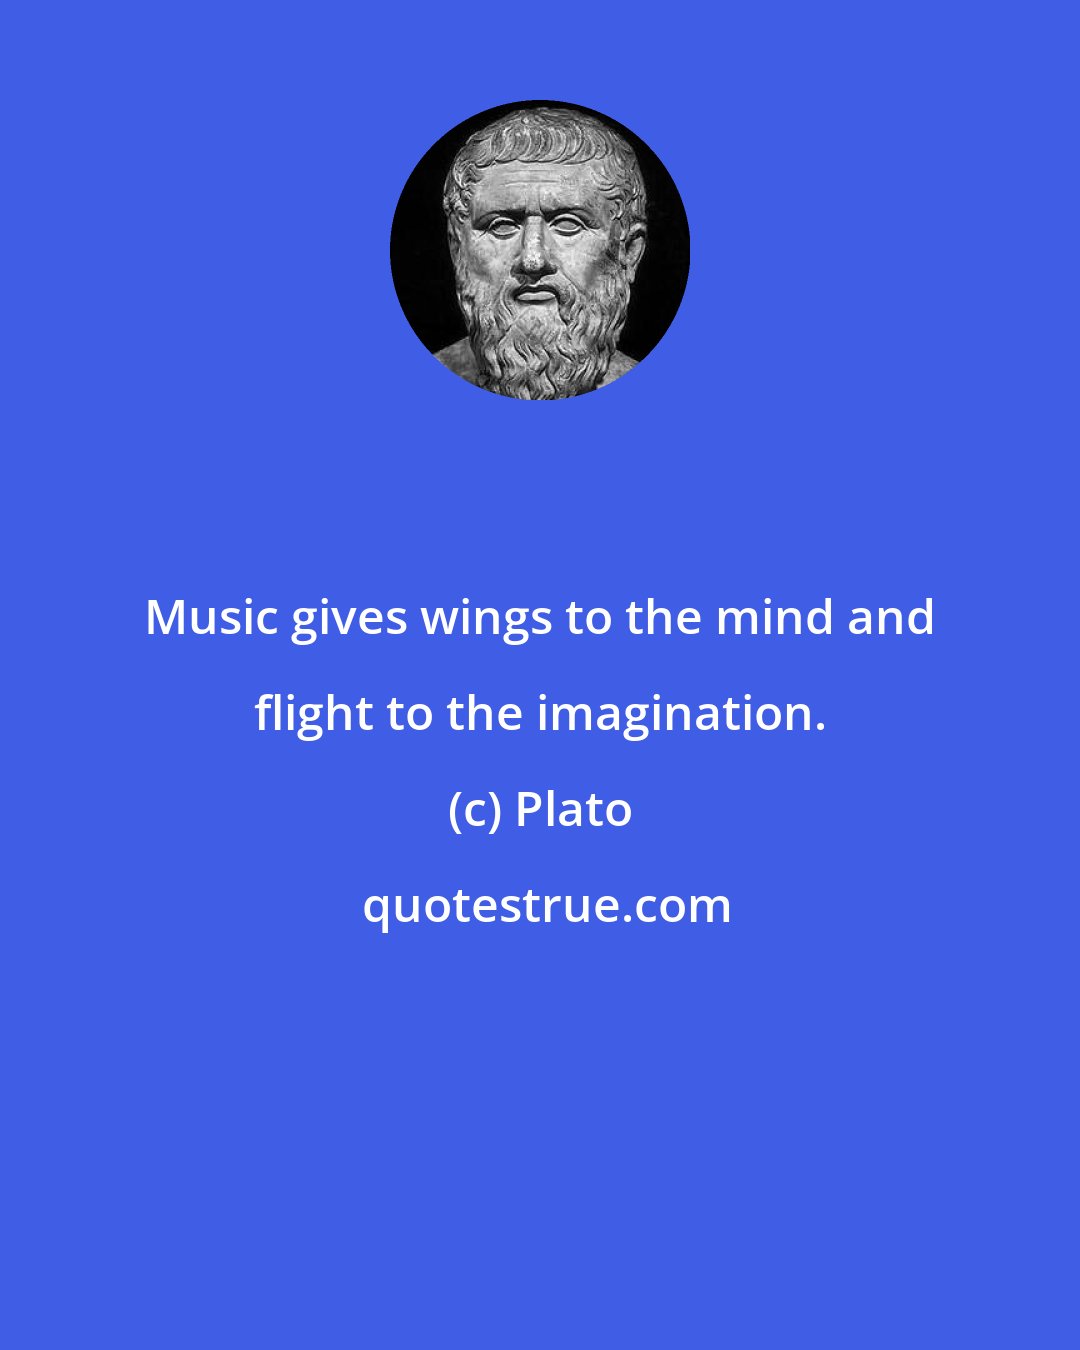 Plato: Music gives wings to the mind and flight to the imagination.